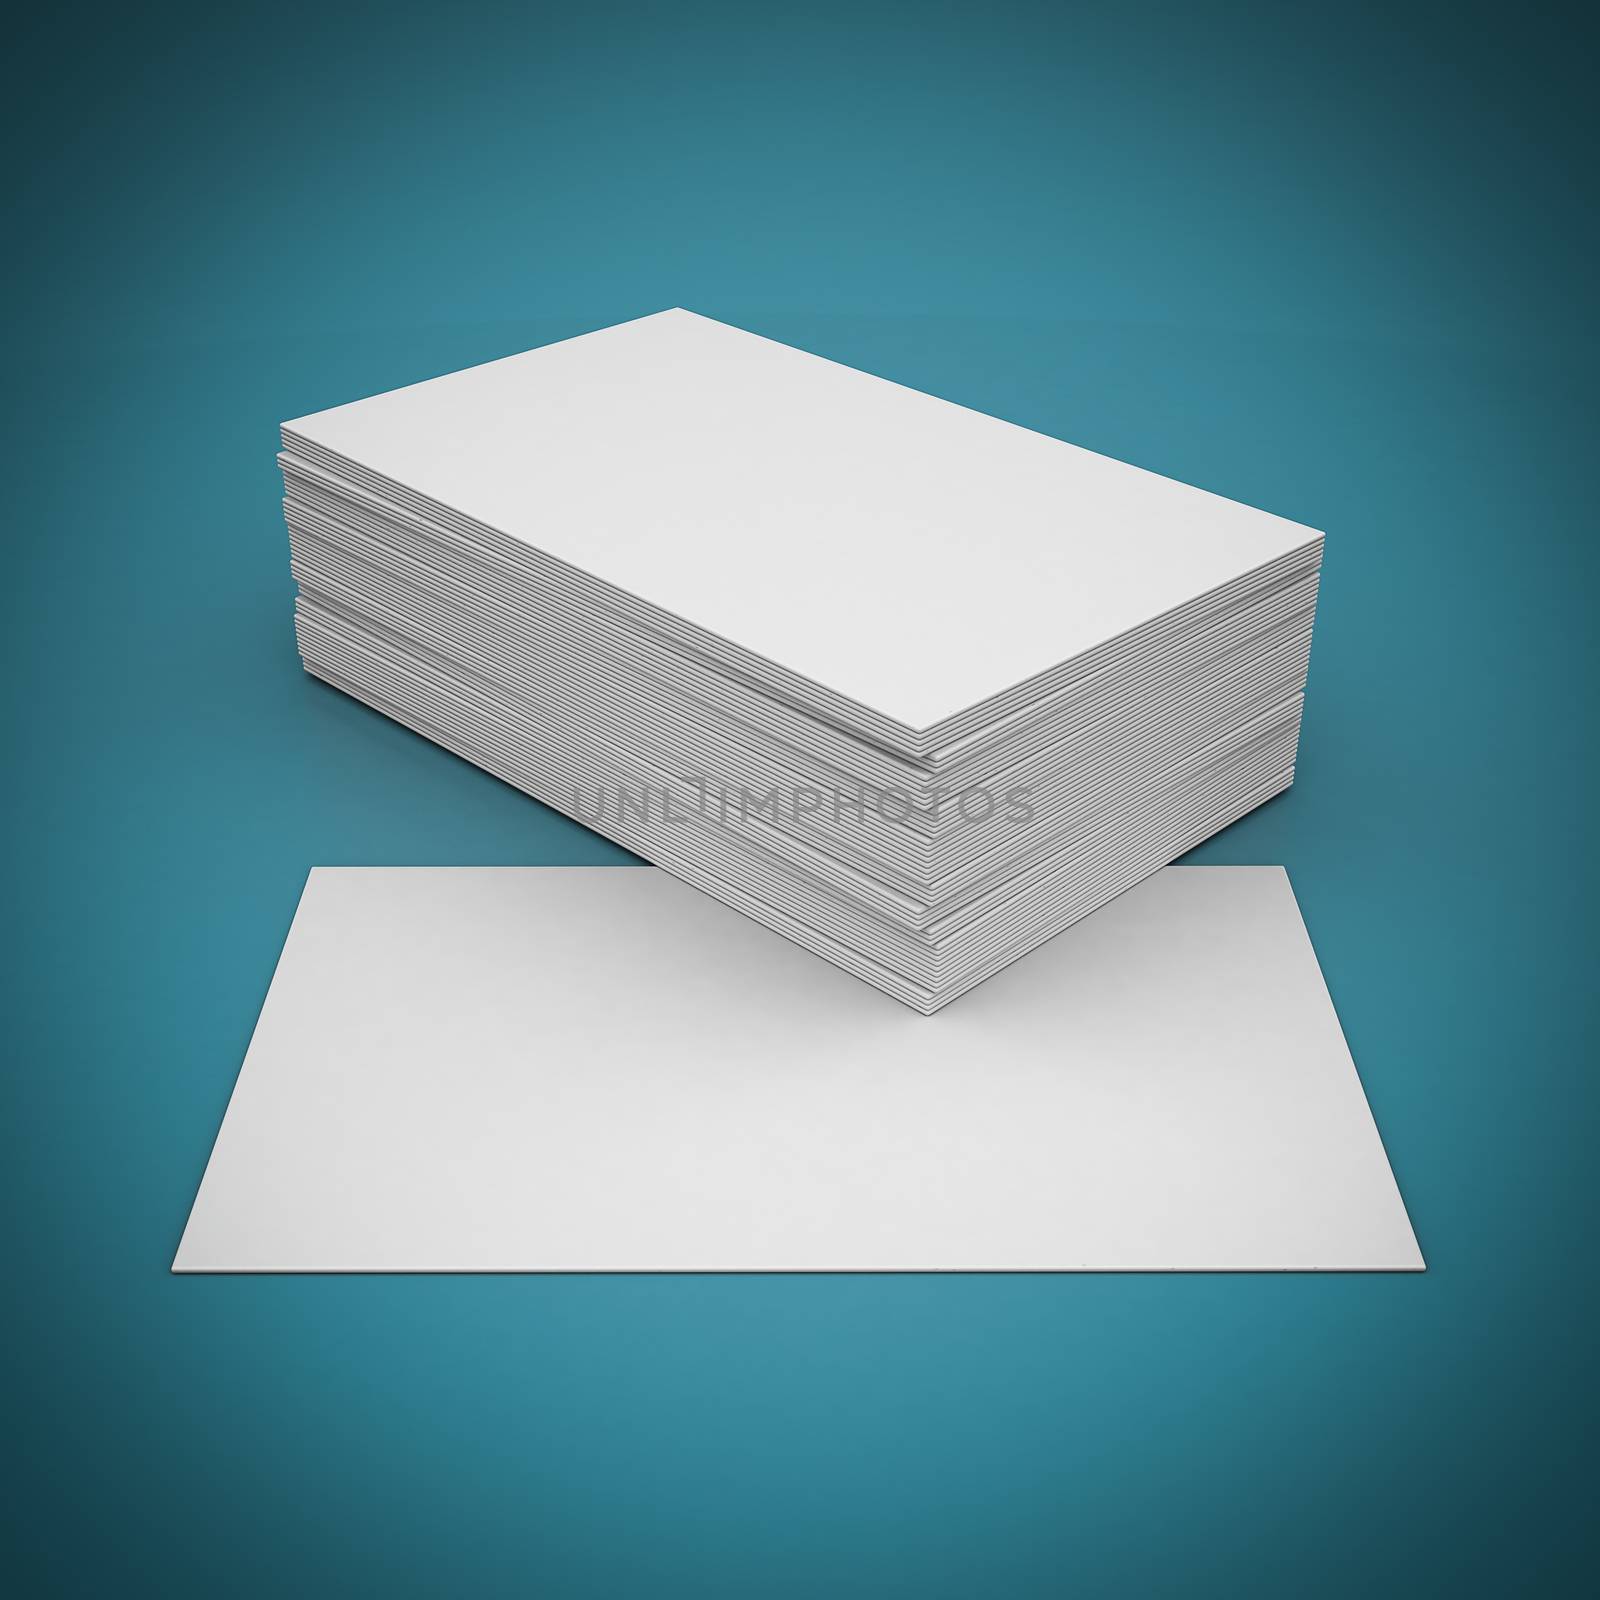 Business cards blank by mrgarry